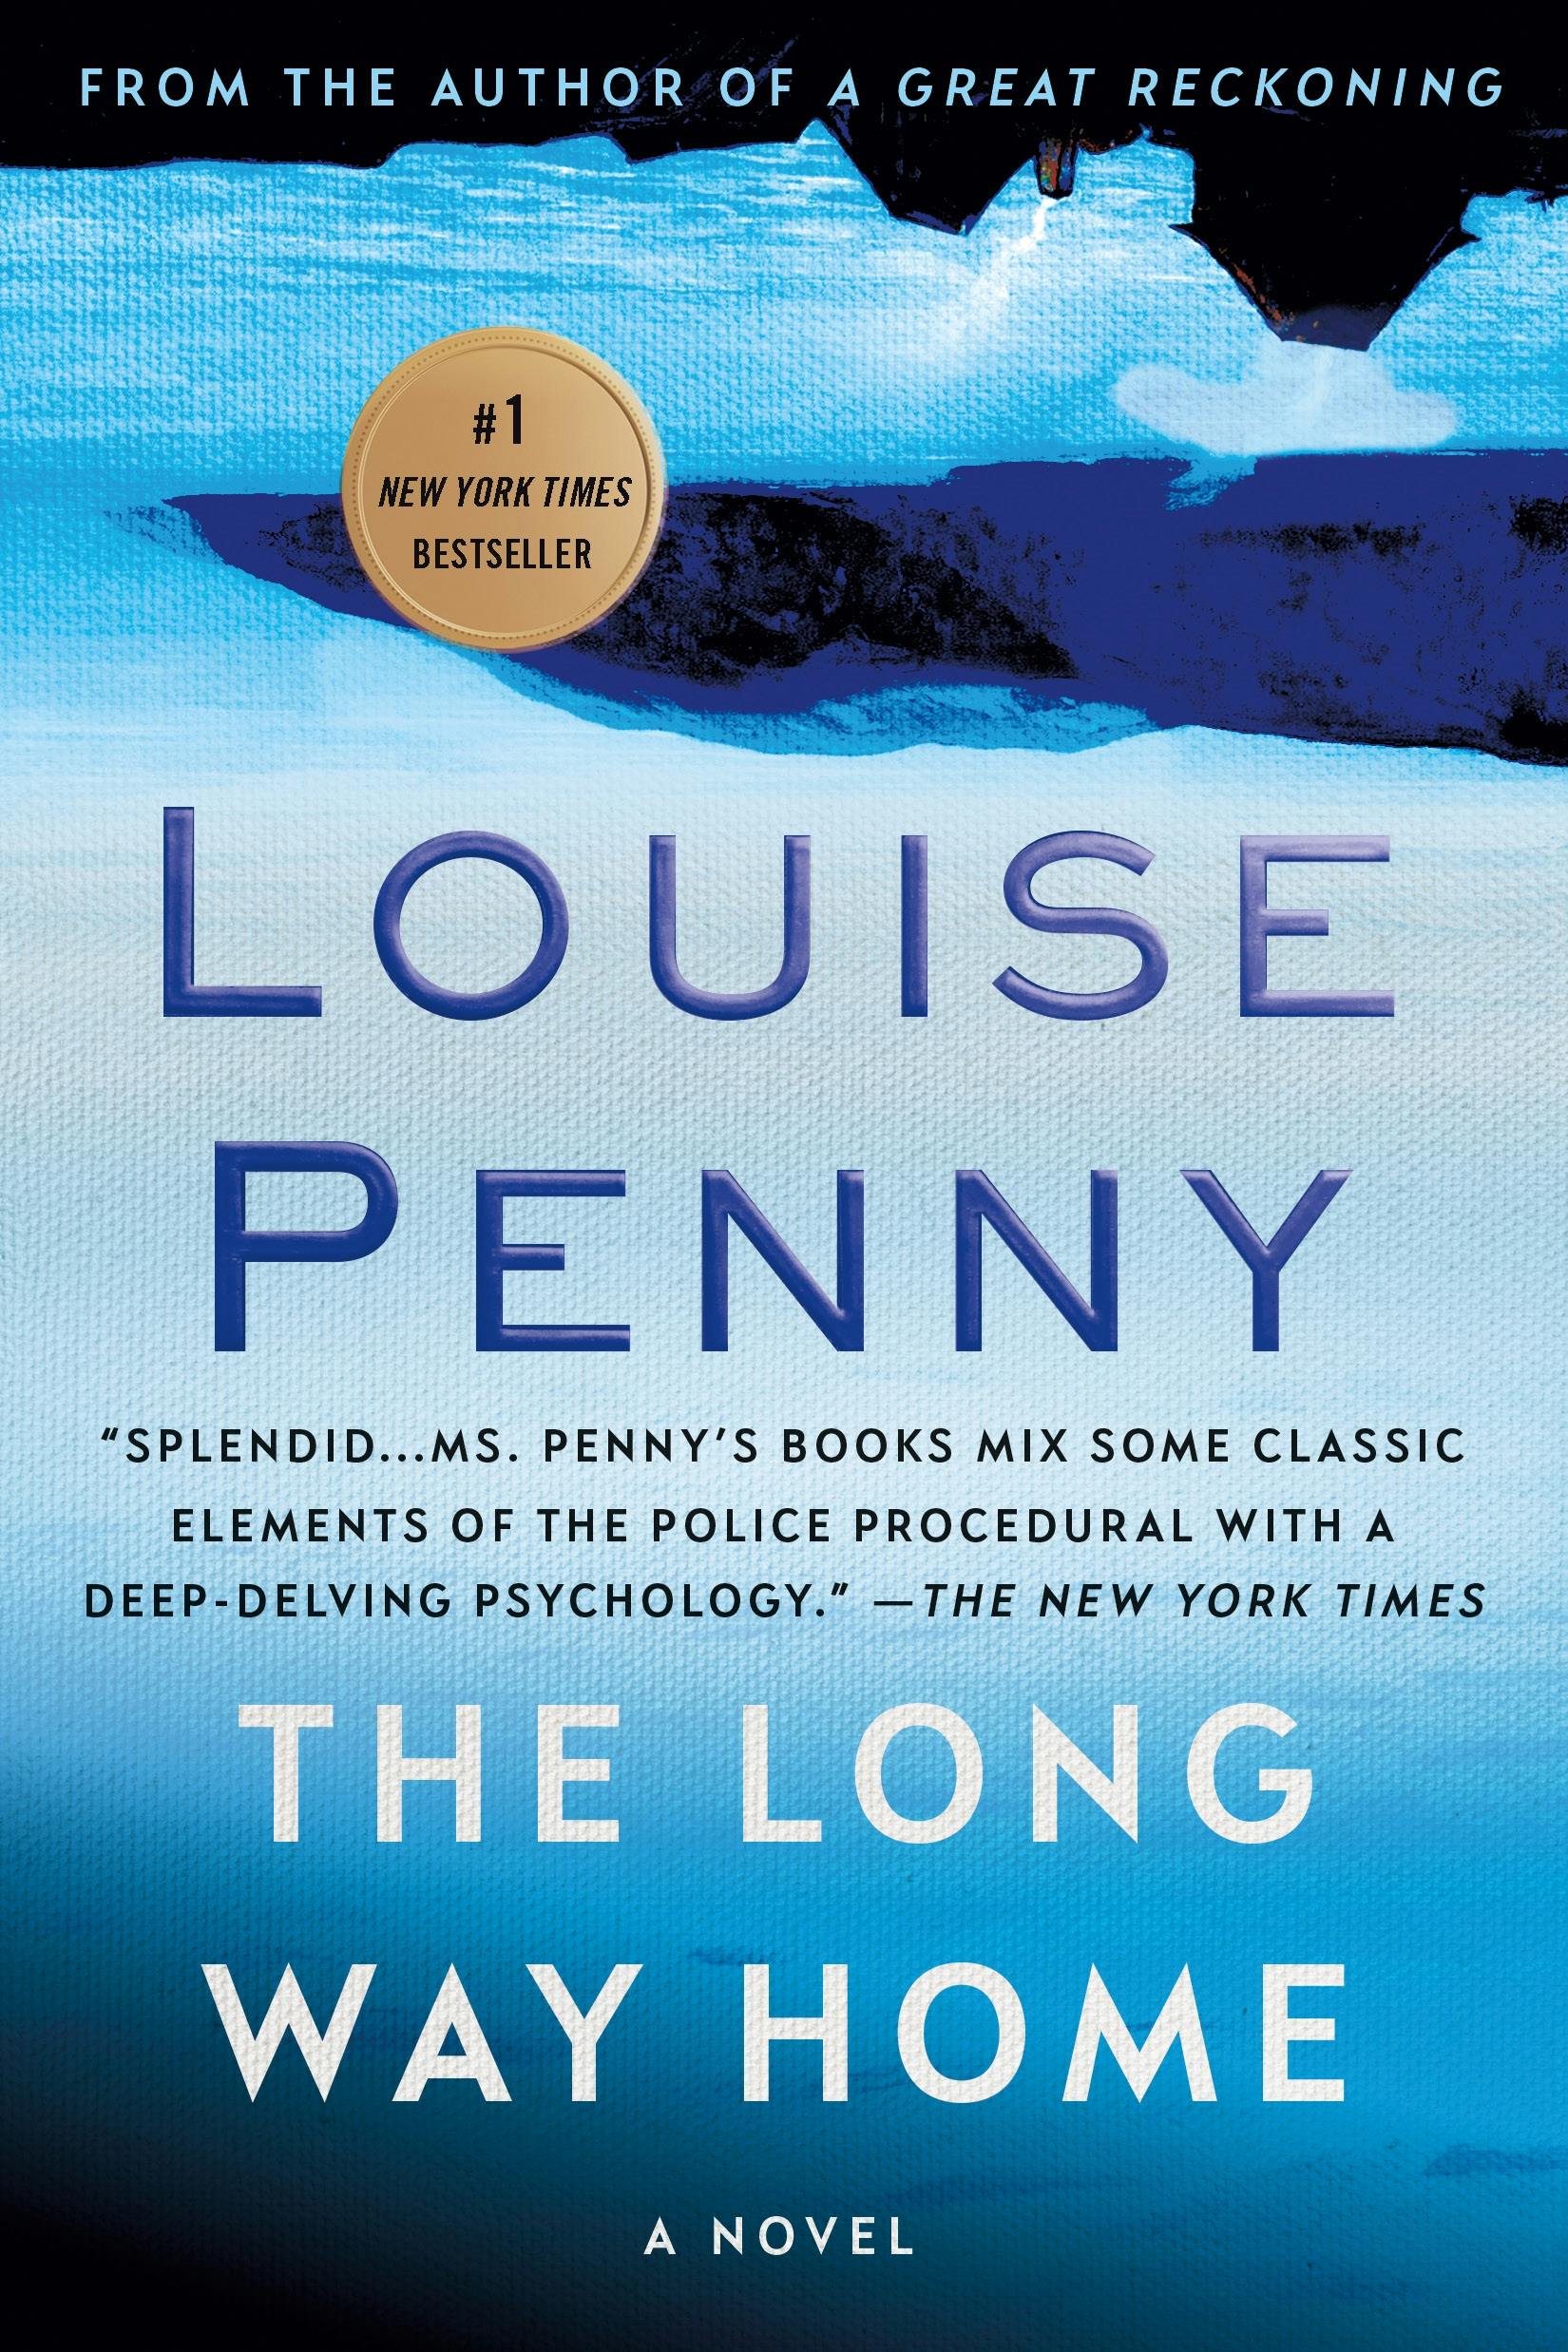 Louise Penny | Inspirational Quote